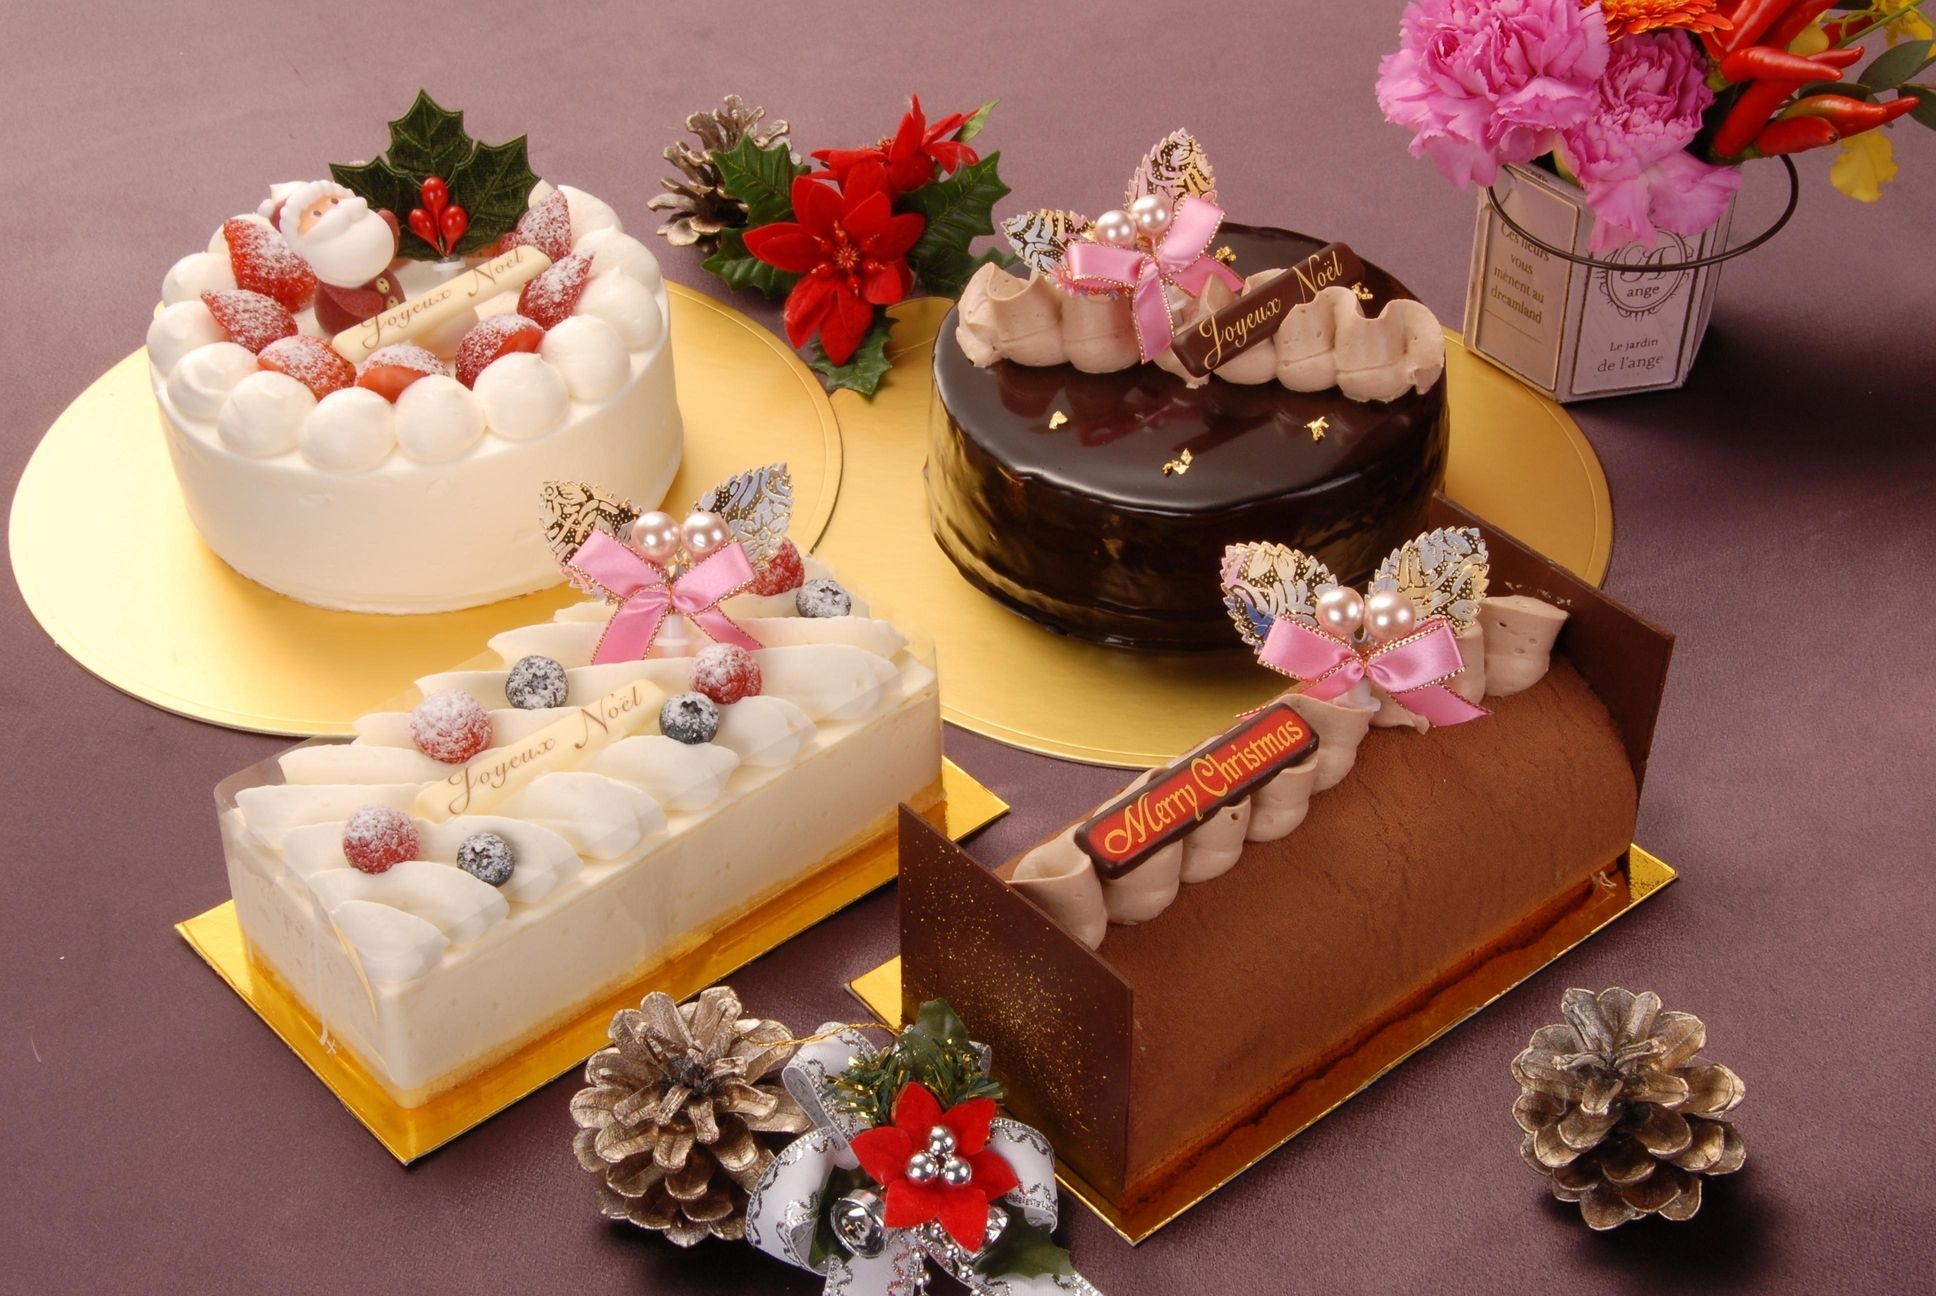 cakes, baking, food, desert, sweet, lettering, inscriptions, bakery products, confectionery